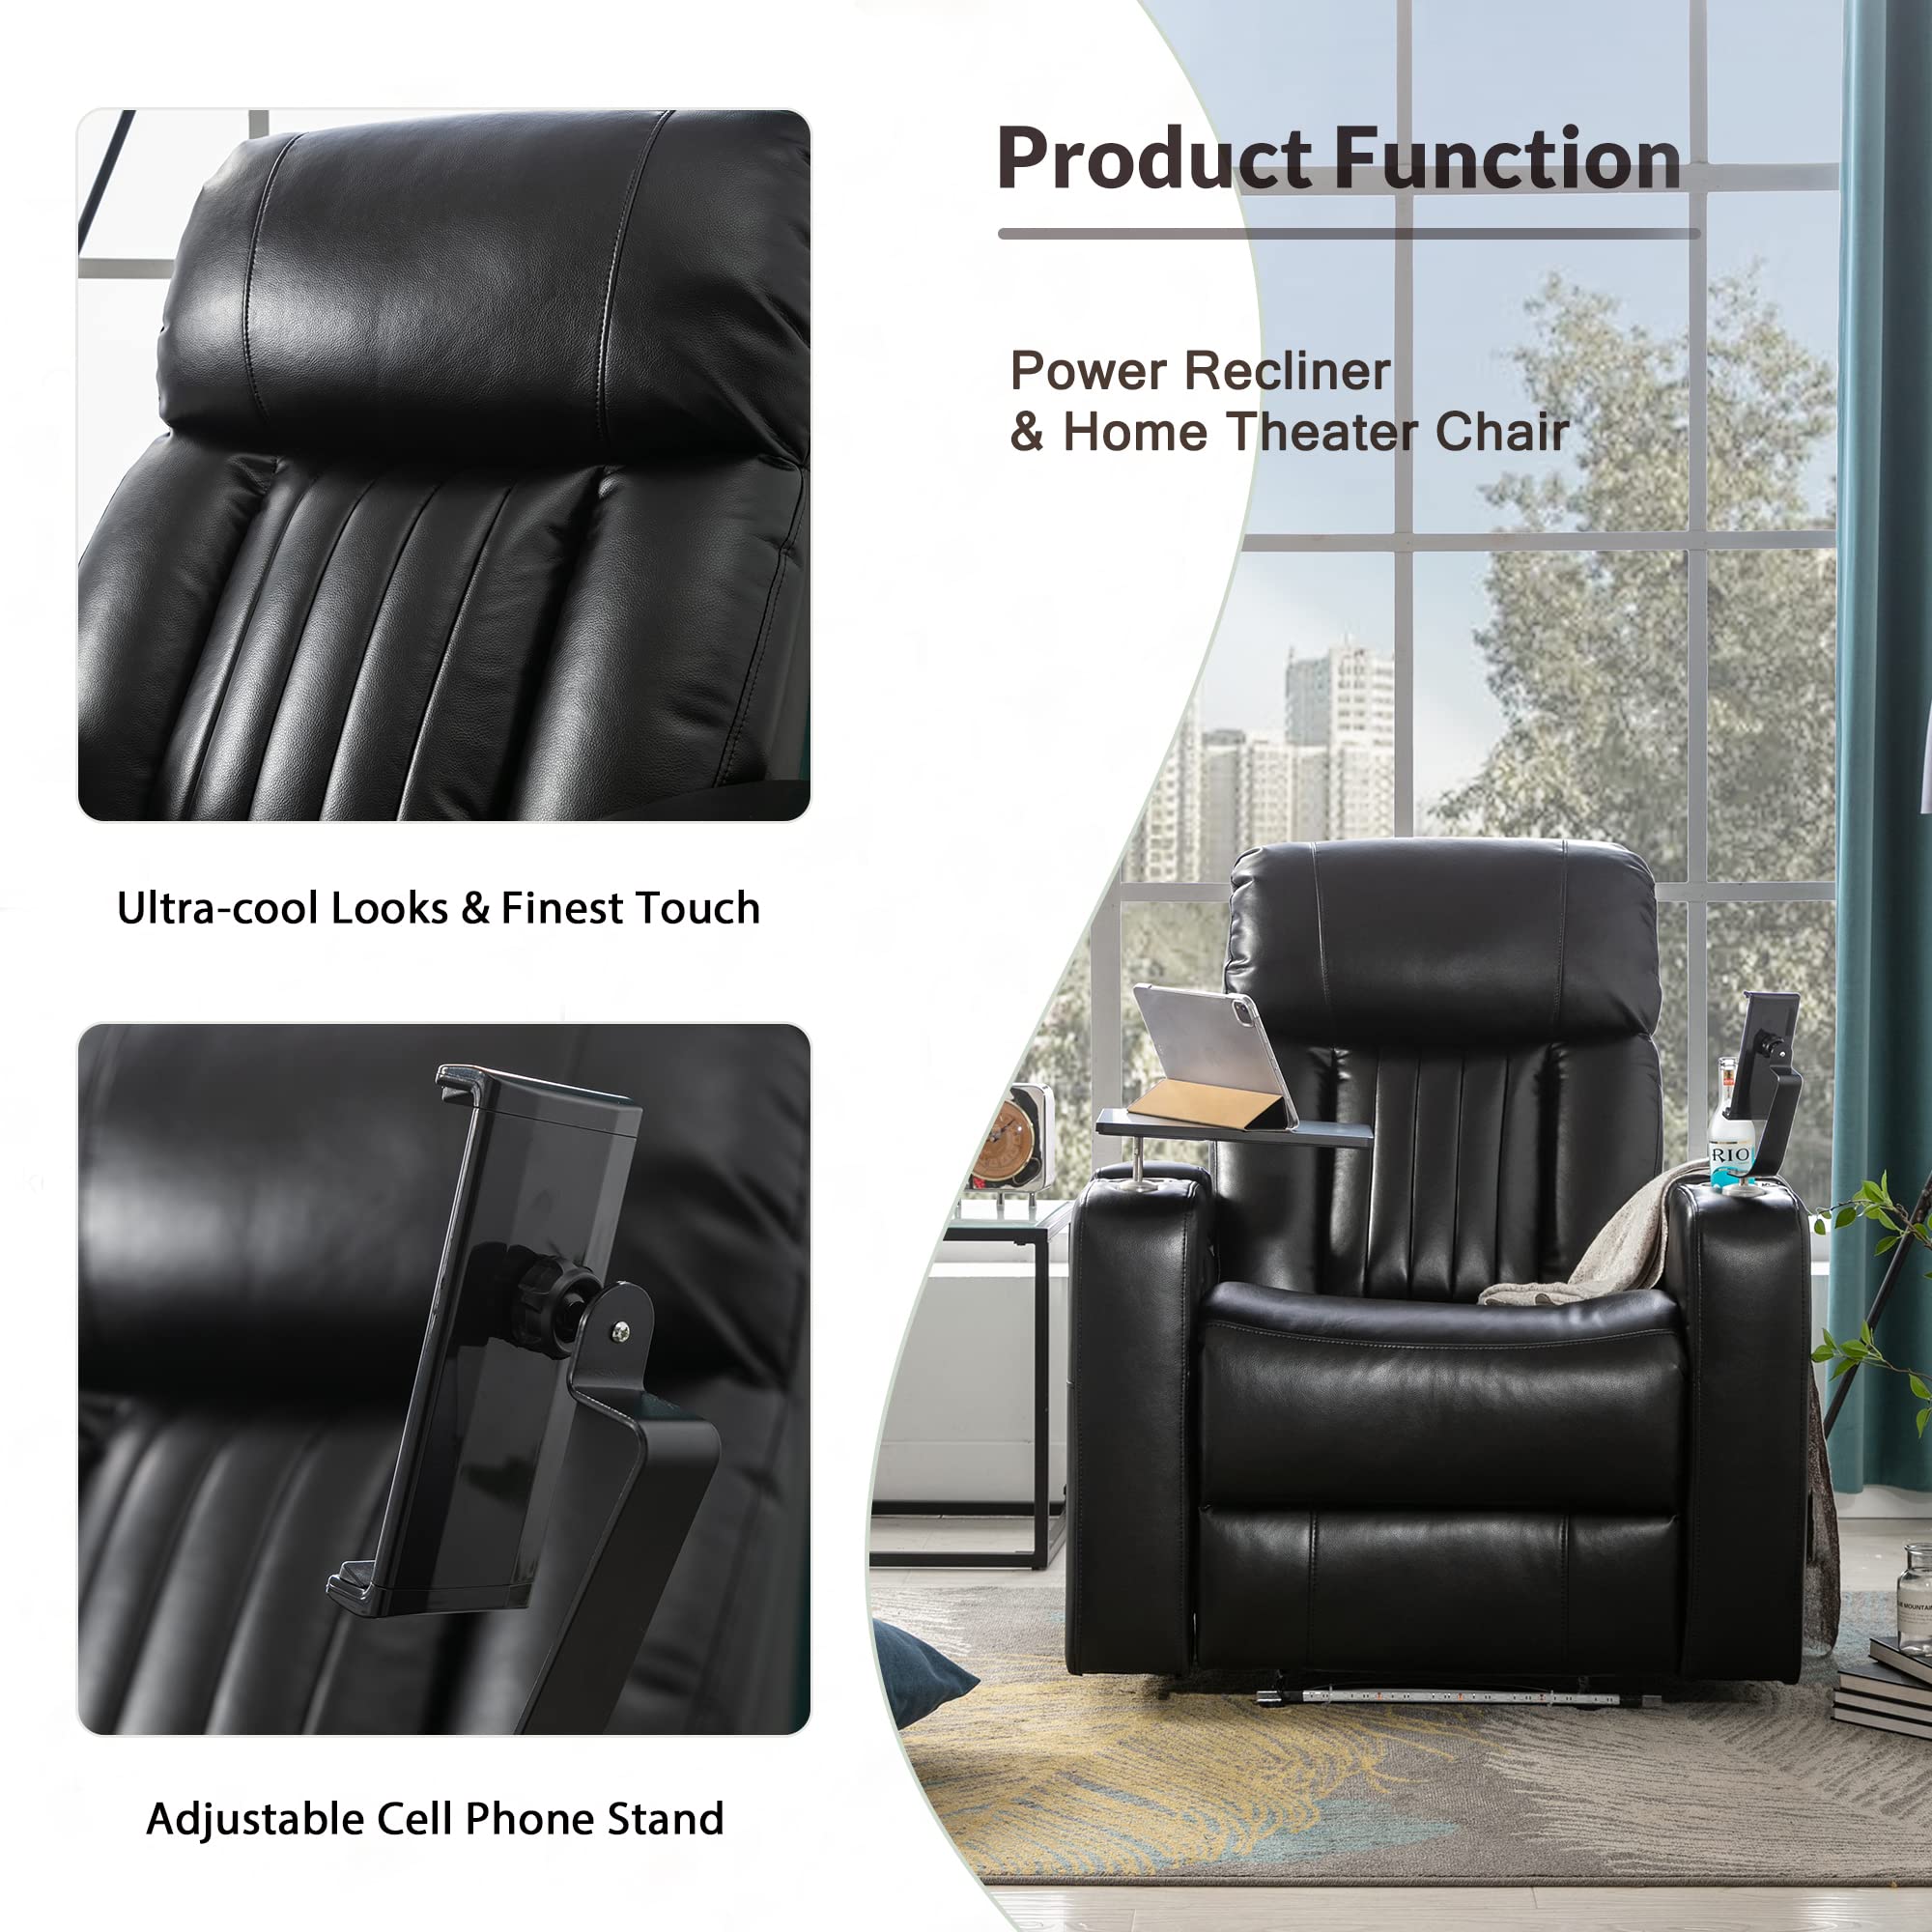 QKFF Leather Power Recliner Chair, Electric PU Recliner with Hidden Arm Storage, USB Charging Port, 2 Cup Holders, Tray Table, Phone Stand for Home Theater (Dark Black)